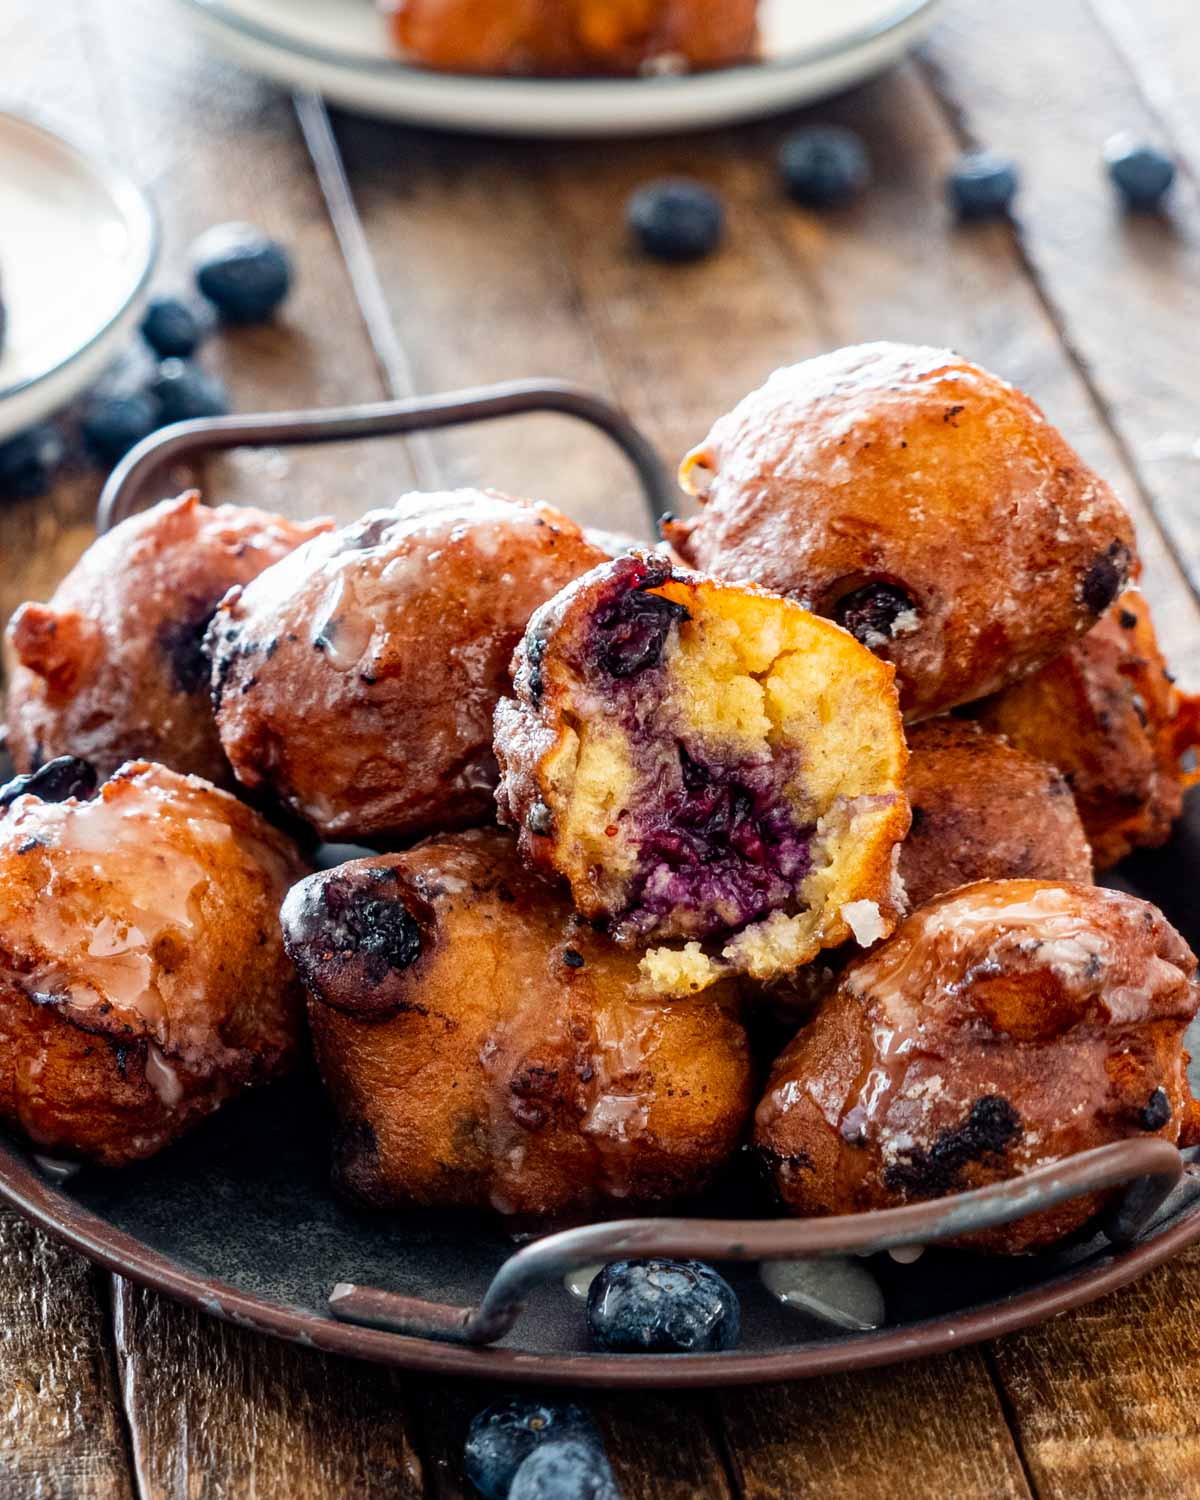 blueberry fritters on a plate.